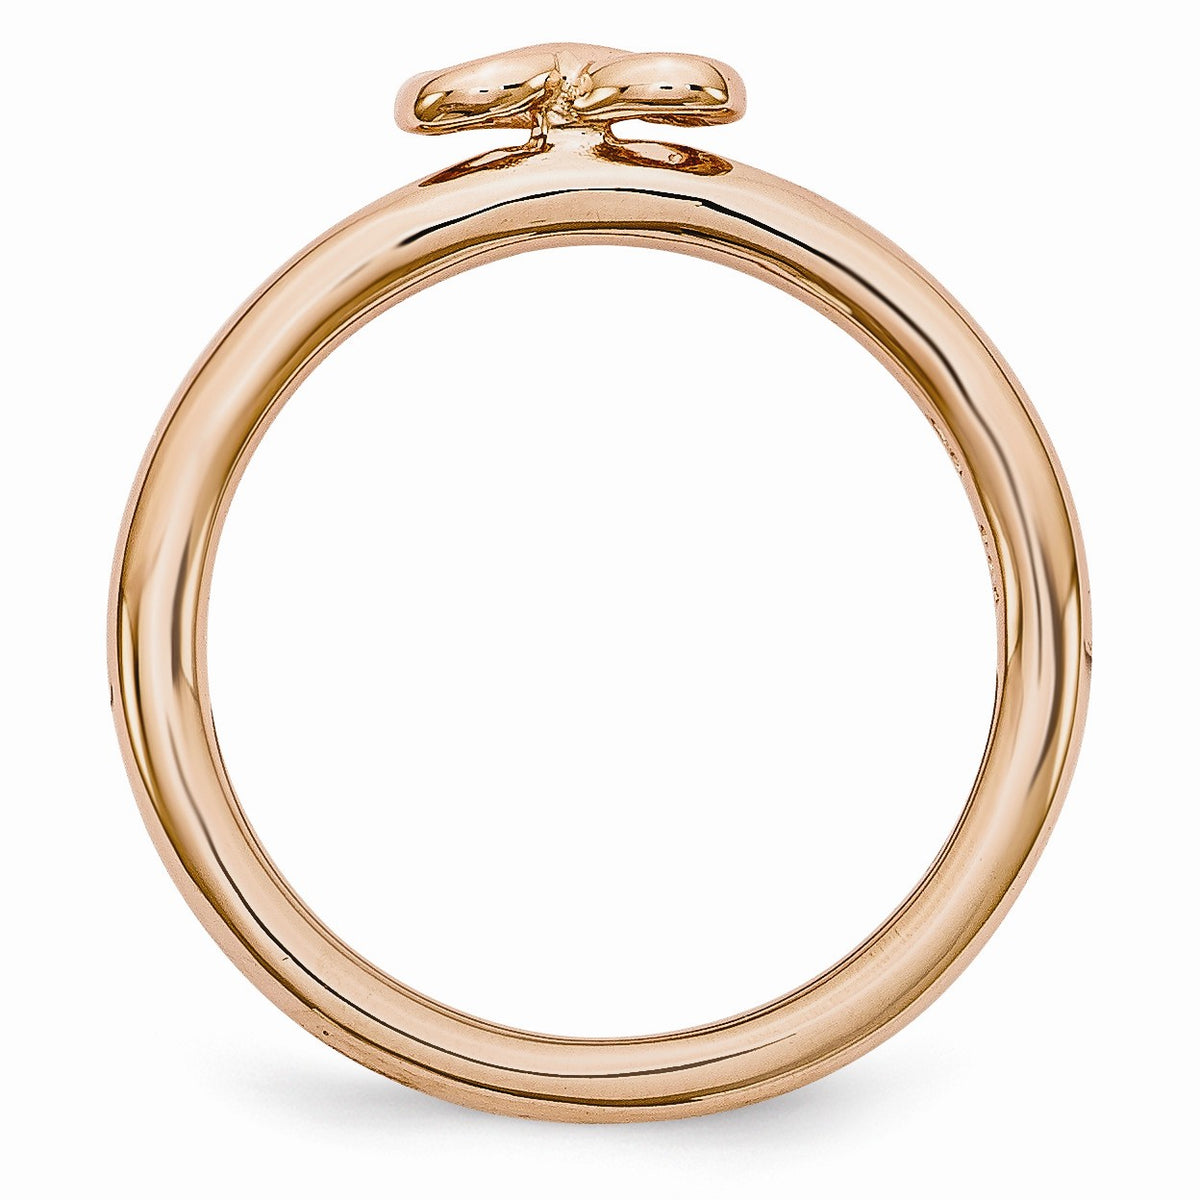 Alternate view of the Rose Gold Tone Sterling Silver Stackable 2.5mm Infinity Symbol Ring by The Black Bow Jewelry Co.